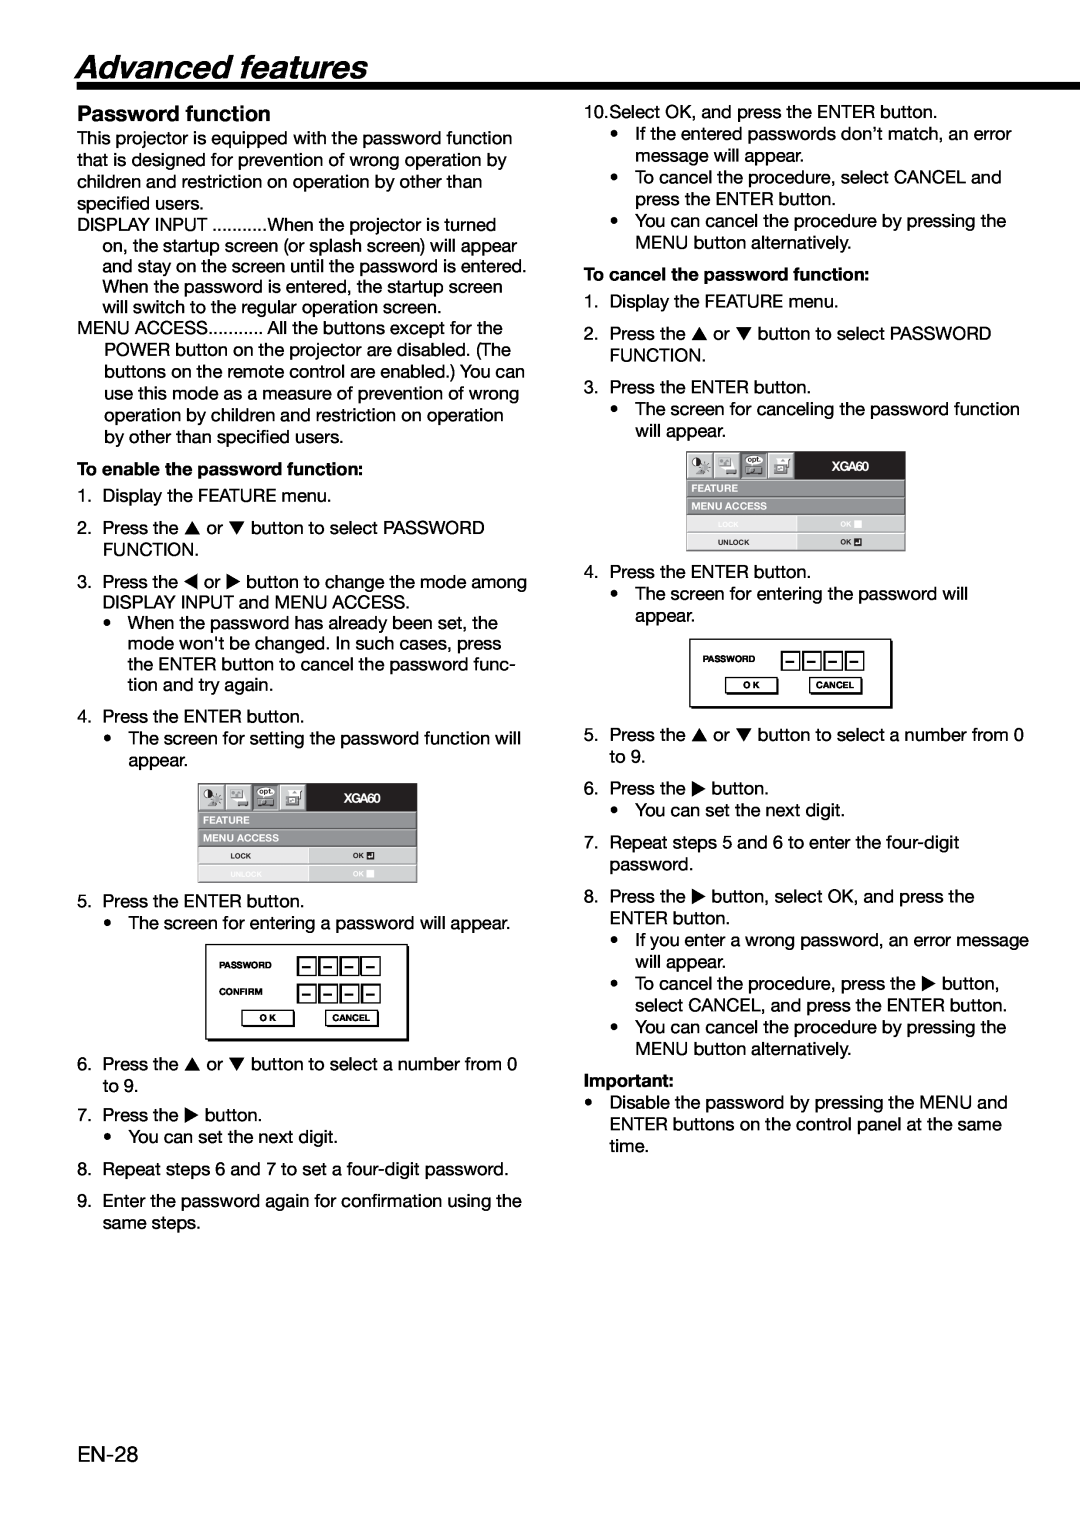 Mitsubishi Electronics XD490U user manual Advanced features, Password function, To enable the password function 